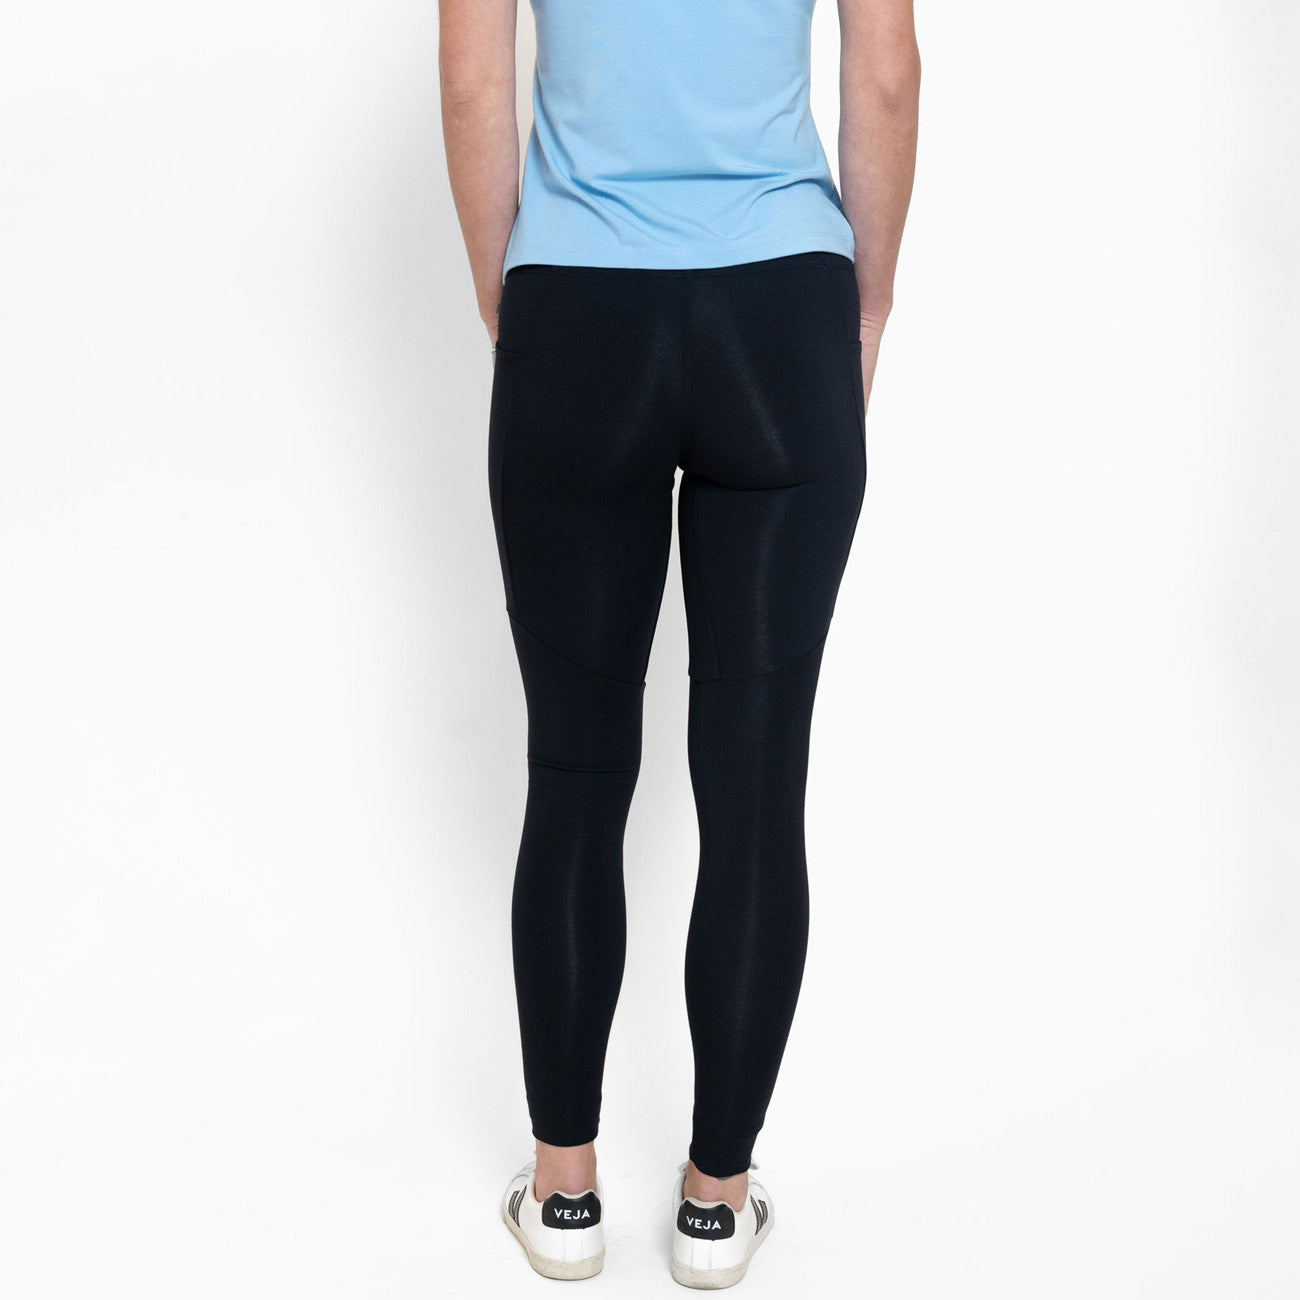 Legging Quality Perfected By Trusted Legging Manufacturer